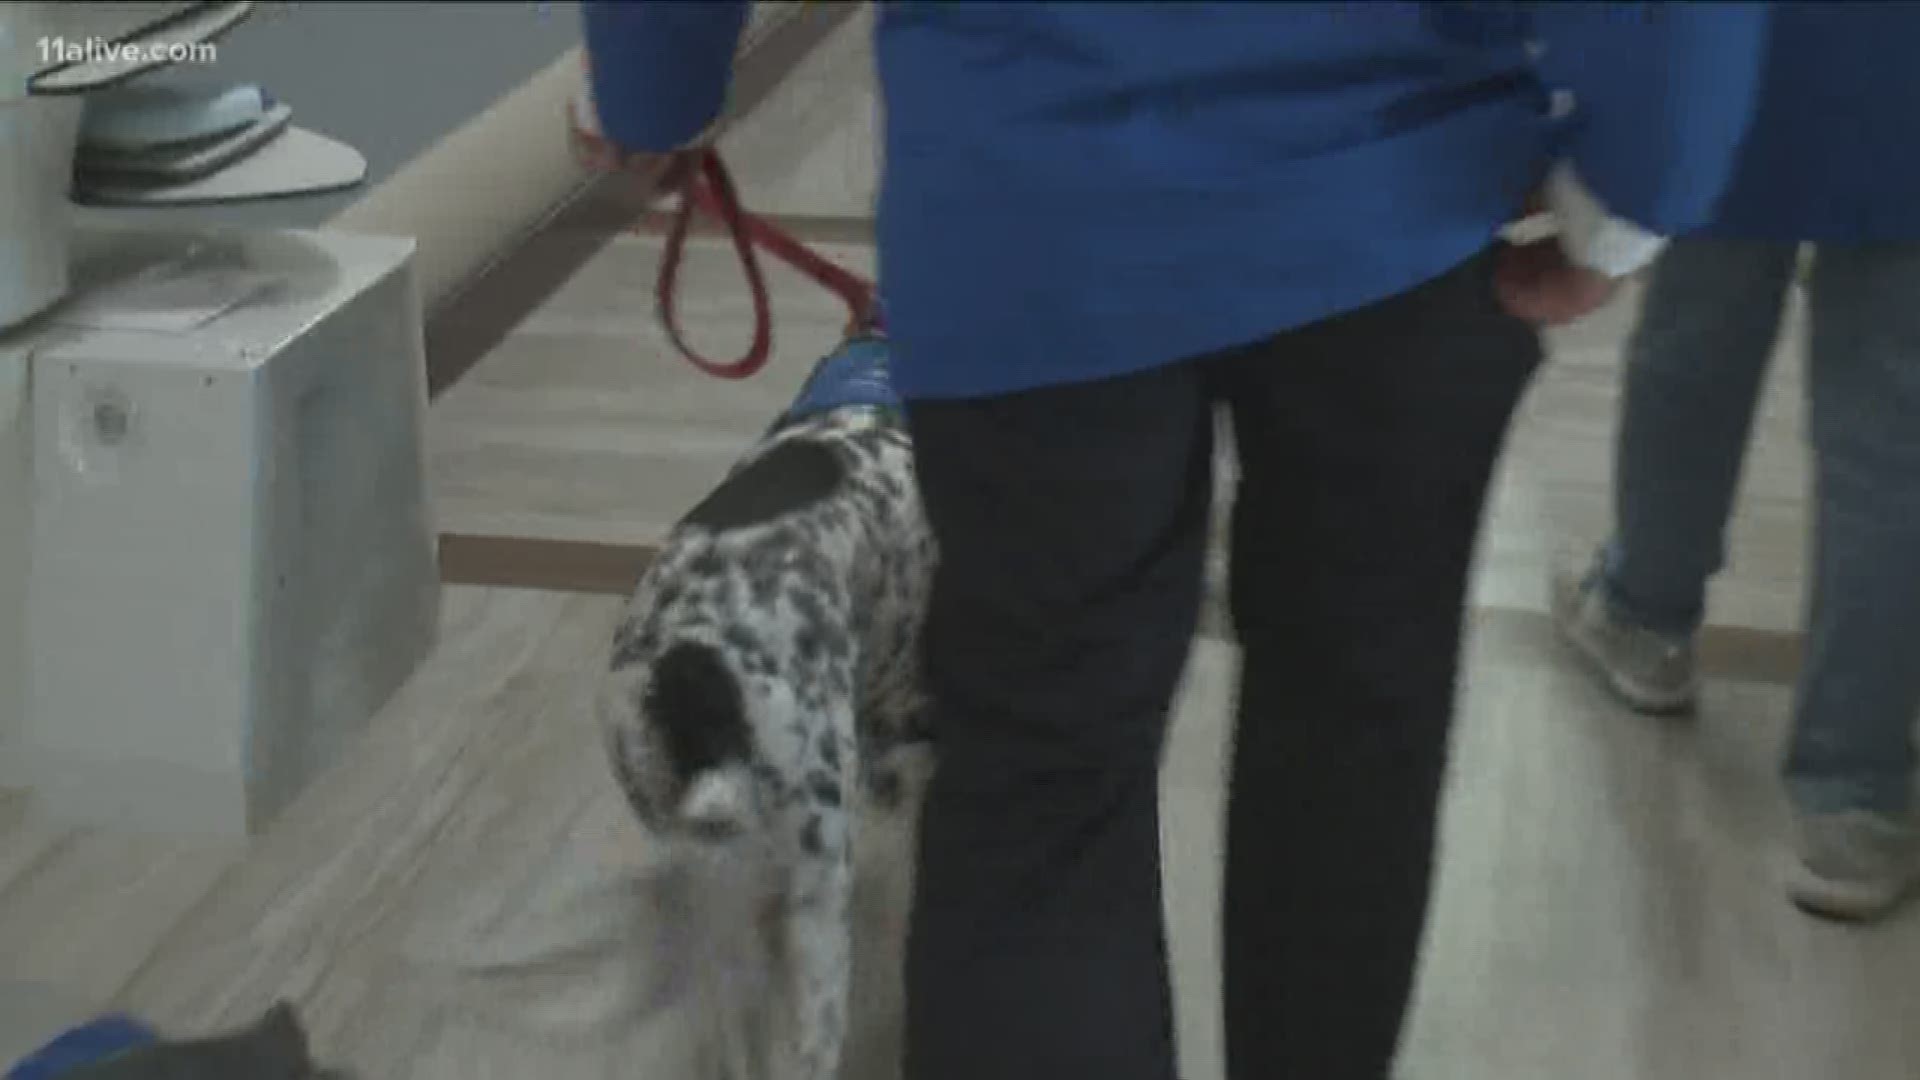 A Chaplain team of K9s at Northside Hospital works to bring happiness and comfort to patients.